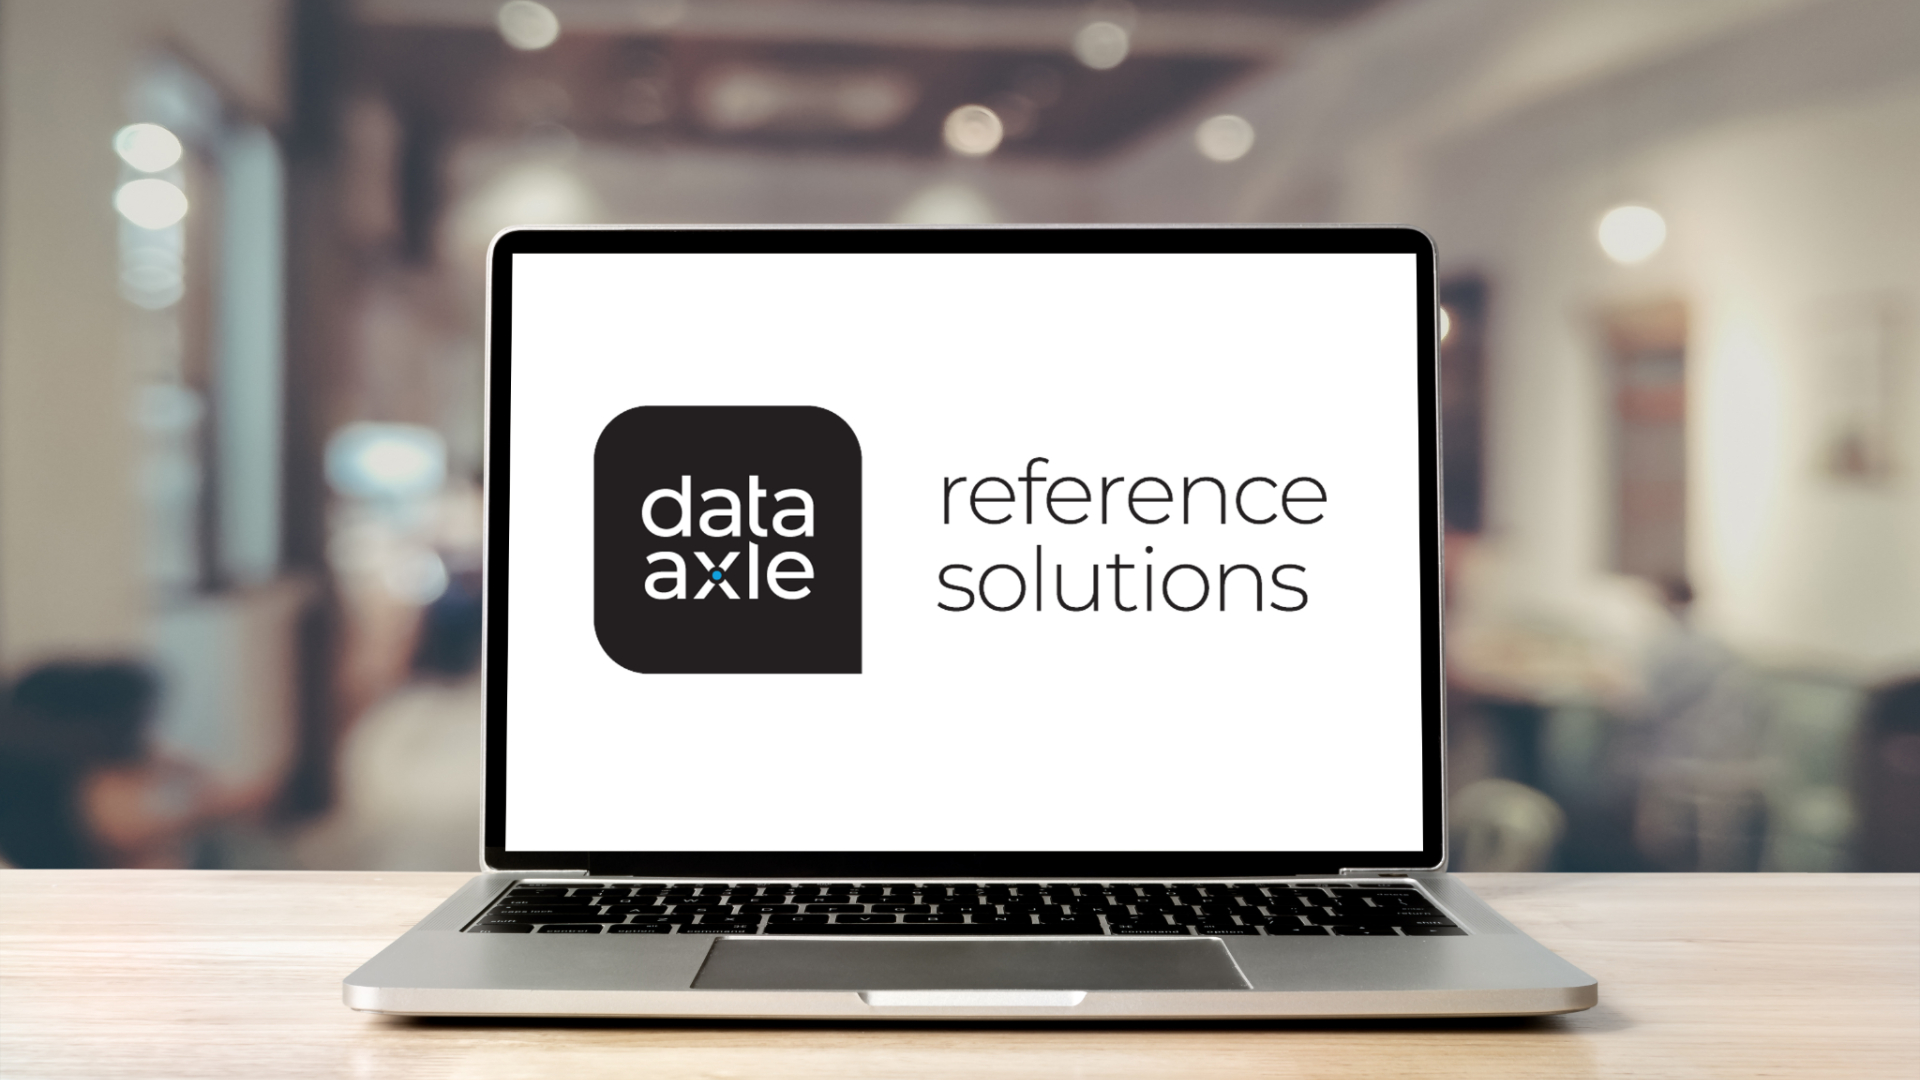 Reference Solutions: Look Up & Reach Consumers for Marketing